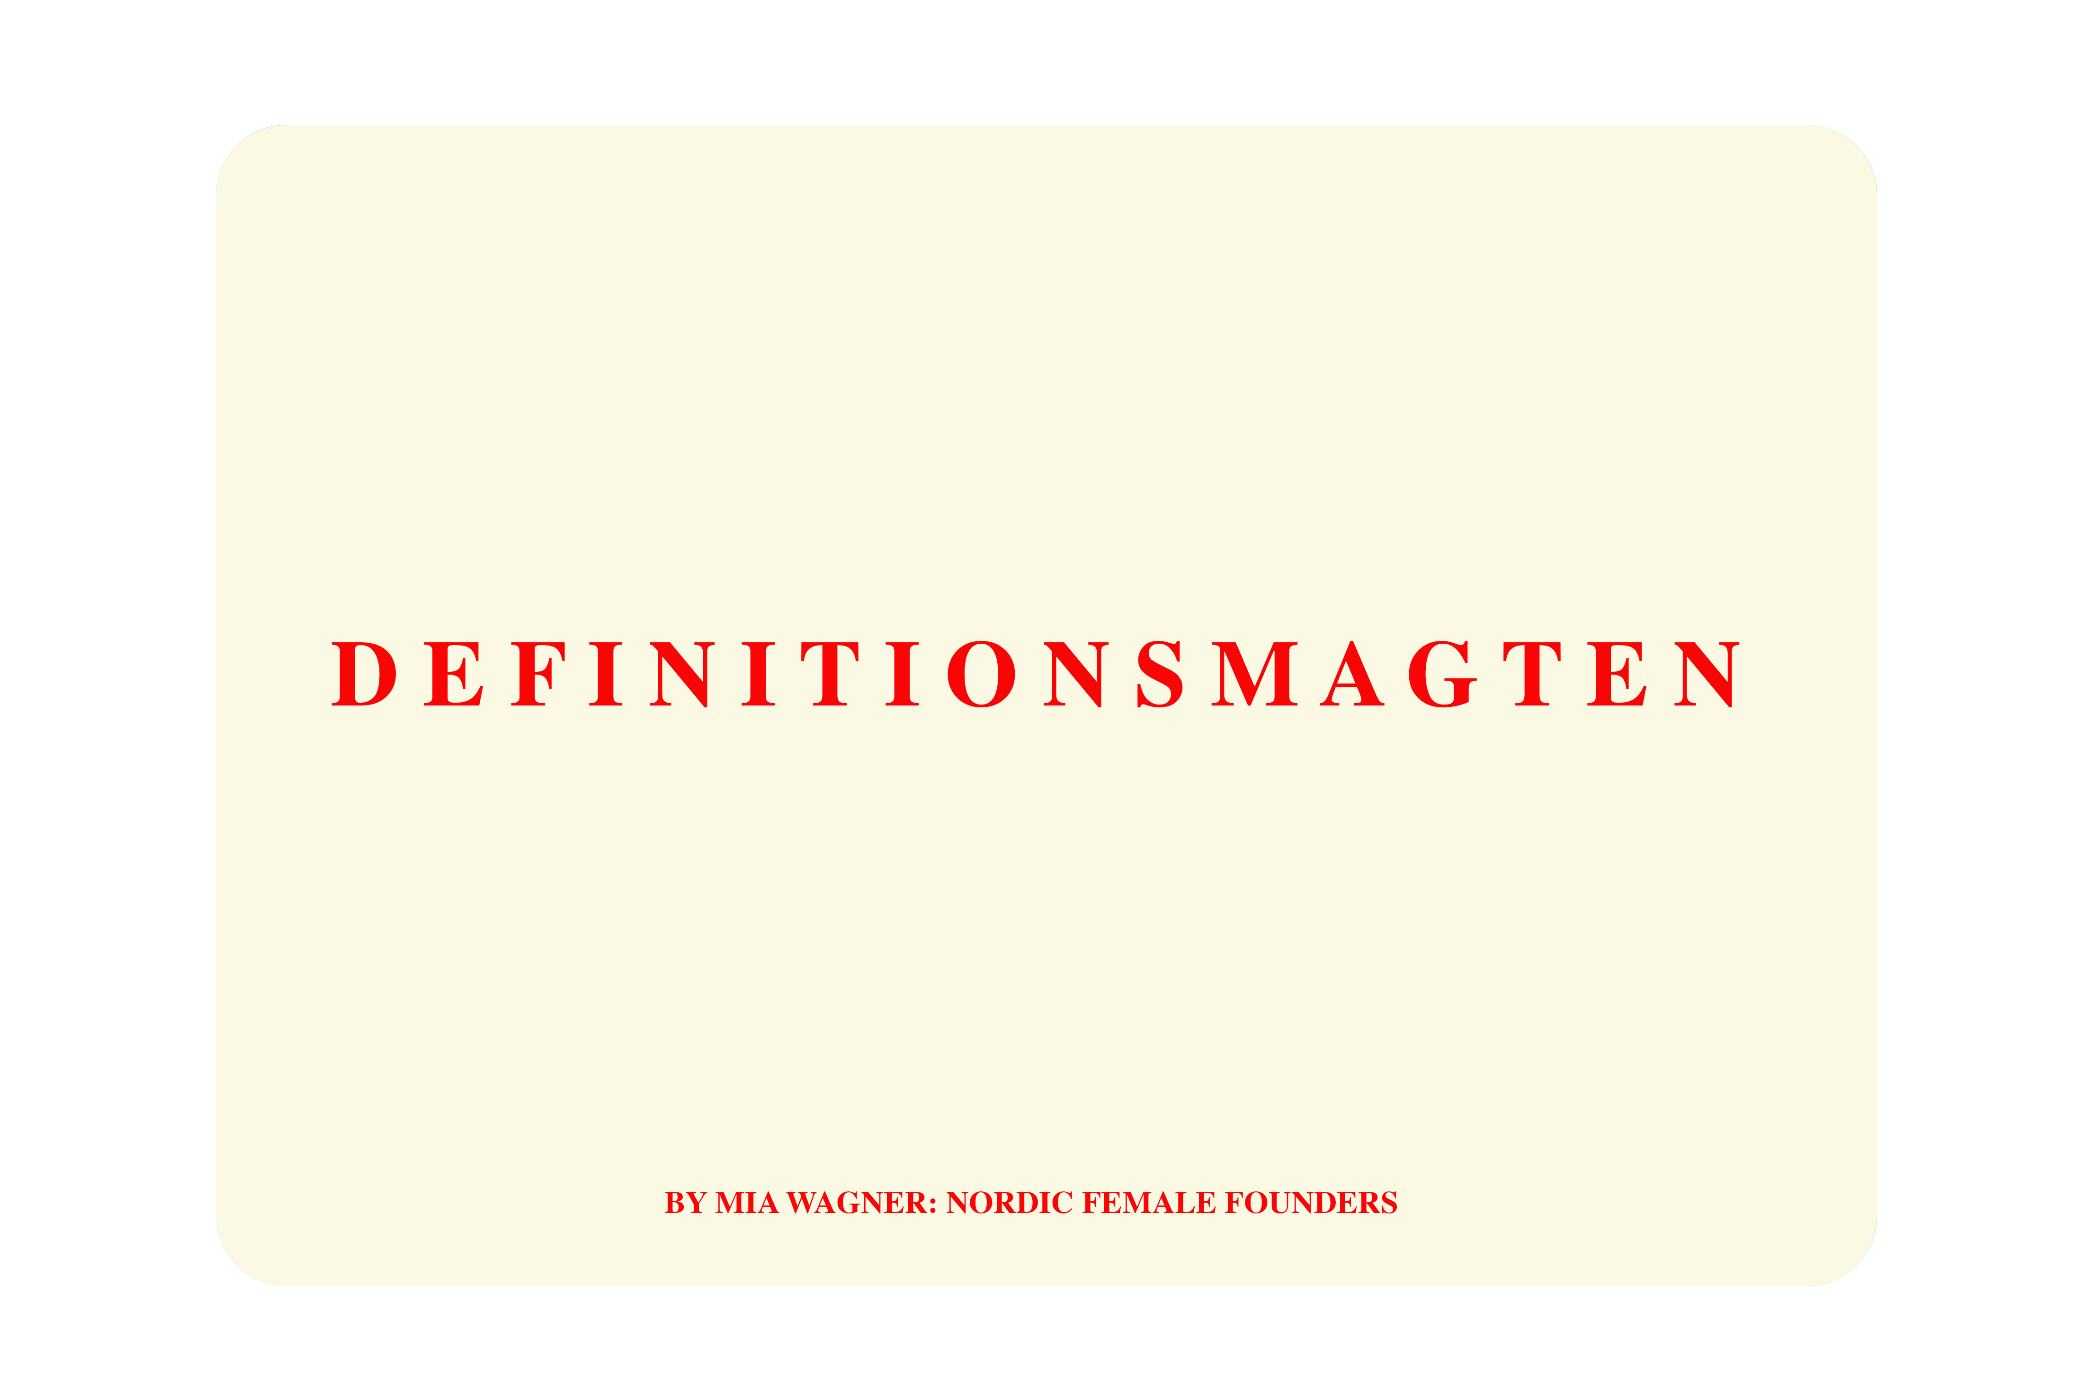 DEFINITIONSMAGTEN by Mia Wagner